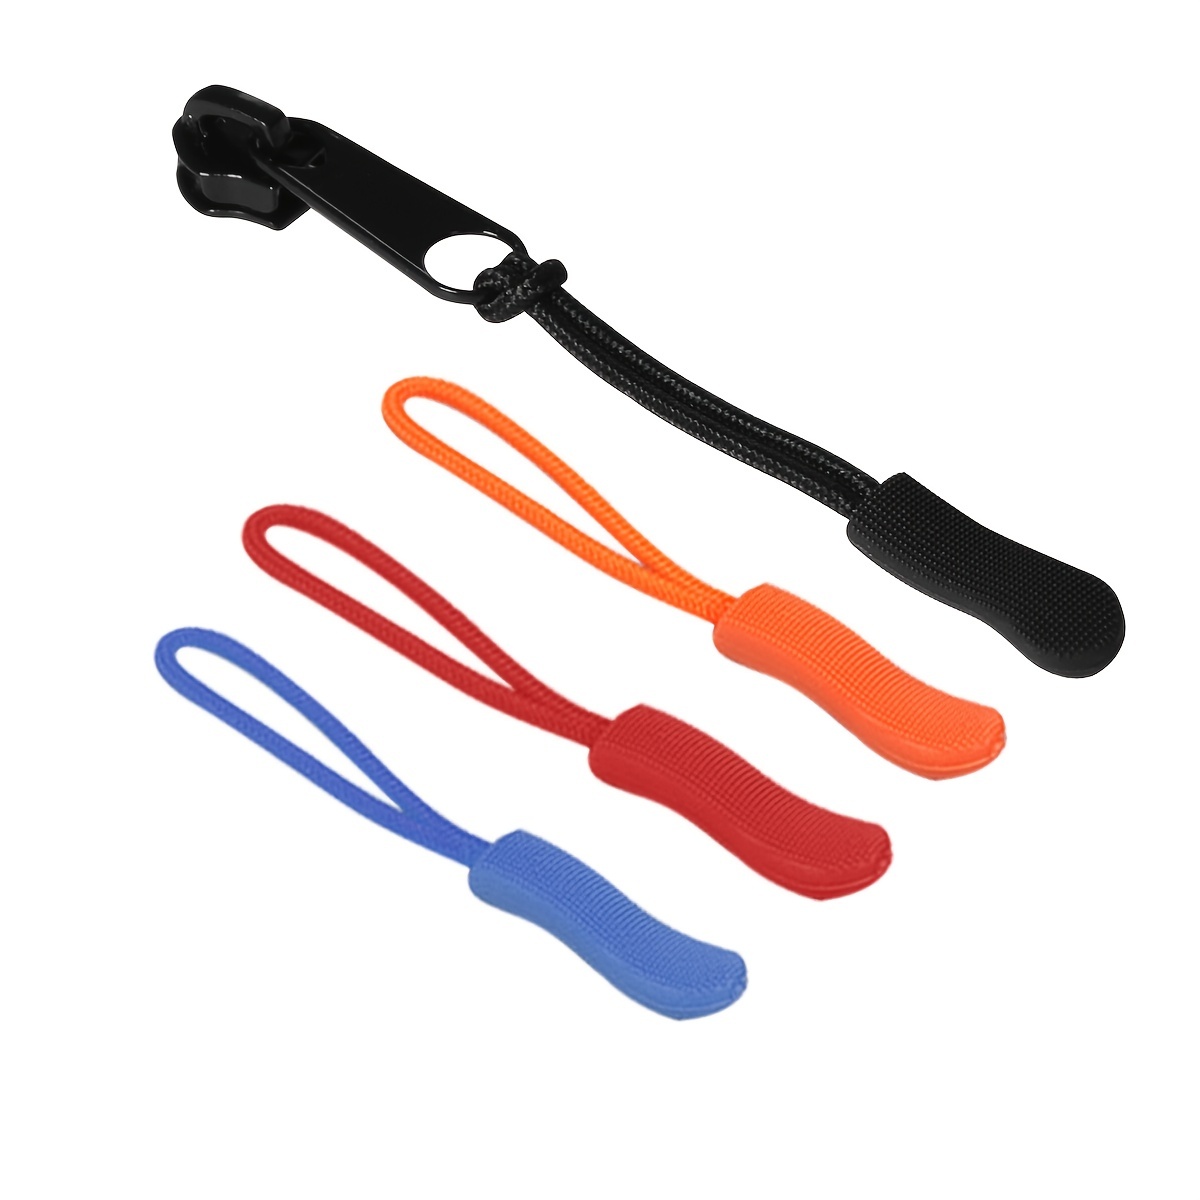  Luminous Zipper Pull,Zipper Extender, Replacement Glow In  The Dark Night Zipper Pull Head, U Shape Tab Tags Extension Cord Fixer For  Luggage,Backpacks,Jackets,Purses,Handbags Clothing 6 Color